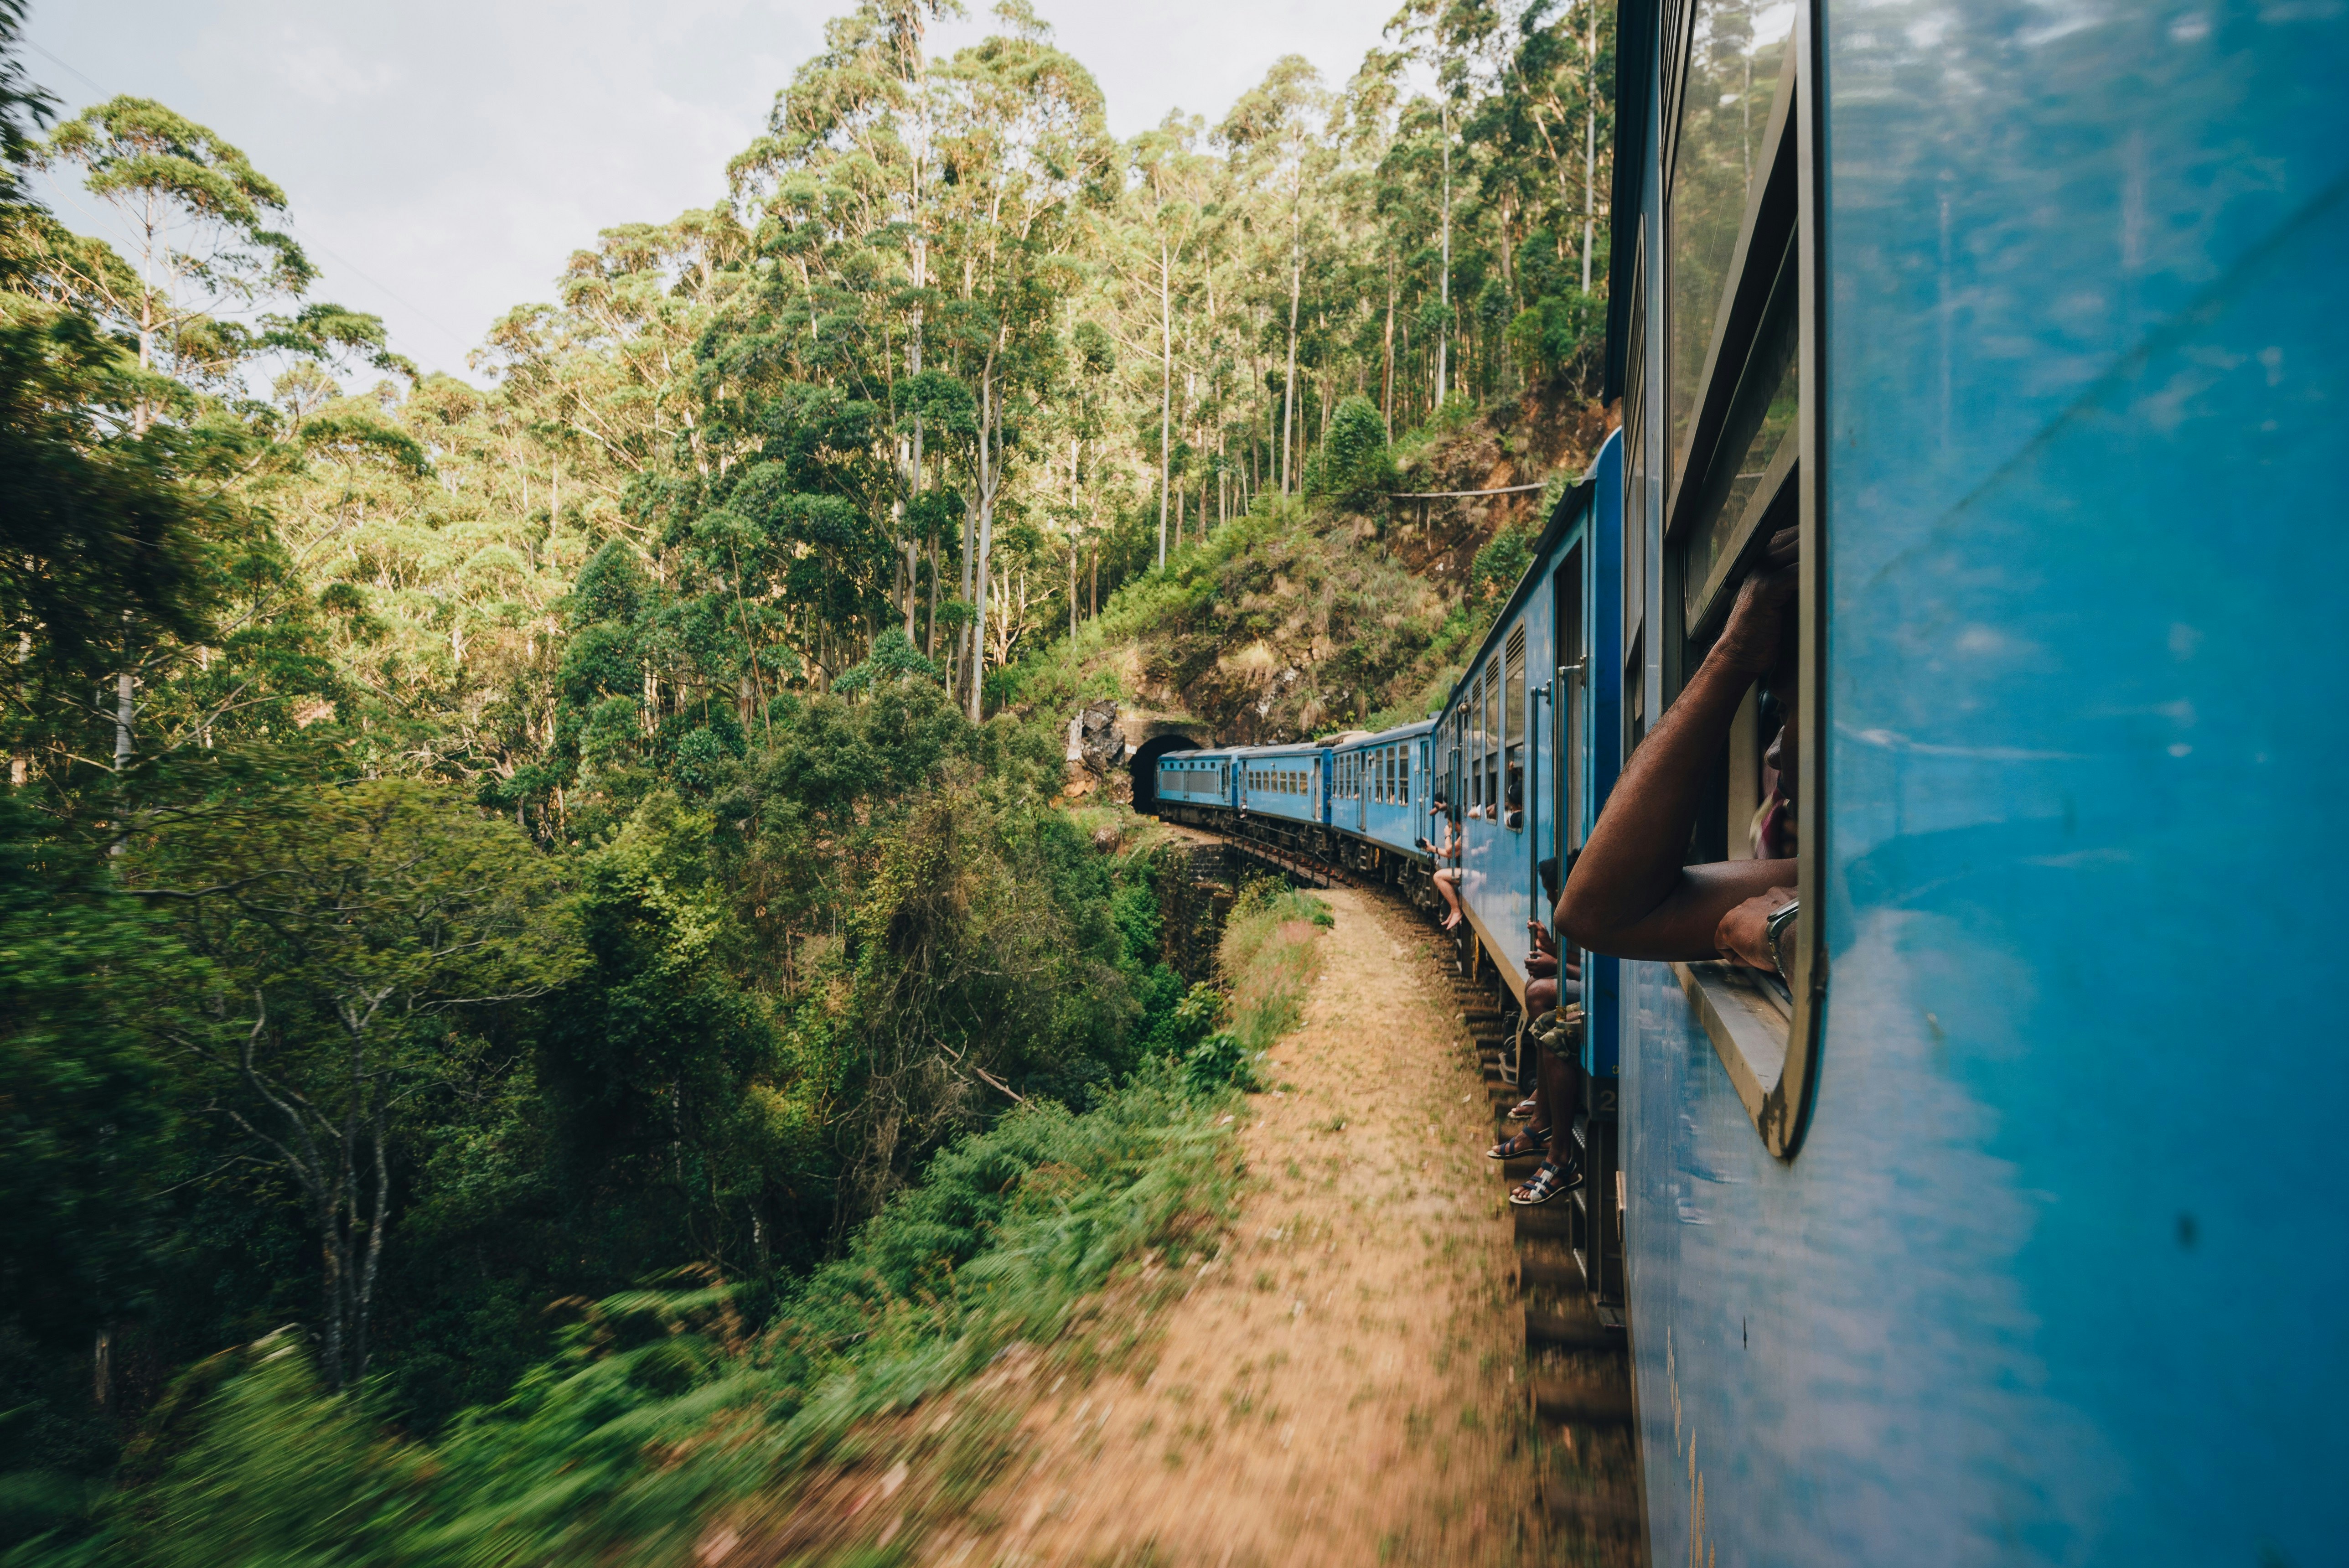 A view of the exterior of a blue Sri Lankan train, taken by an on-board passenger leaning out of the window. The train is travelling through the Hill Country, and is surrounded by green jungle. Up ahead, a tunnel is visible.